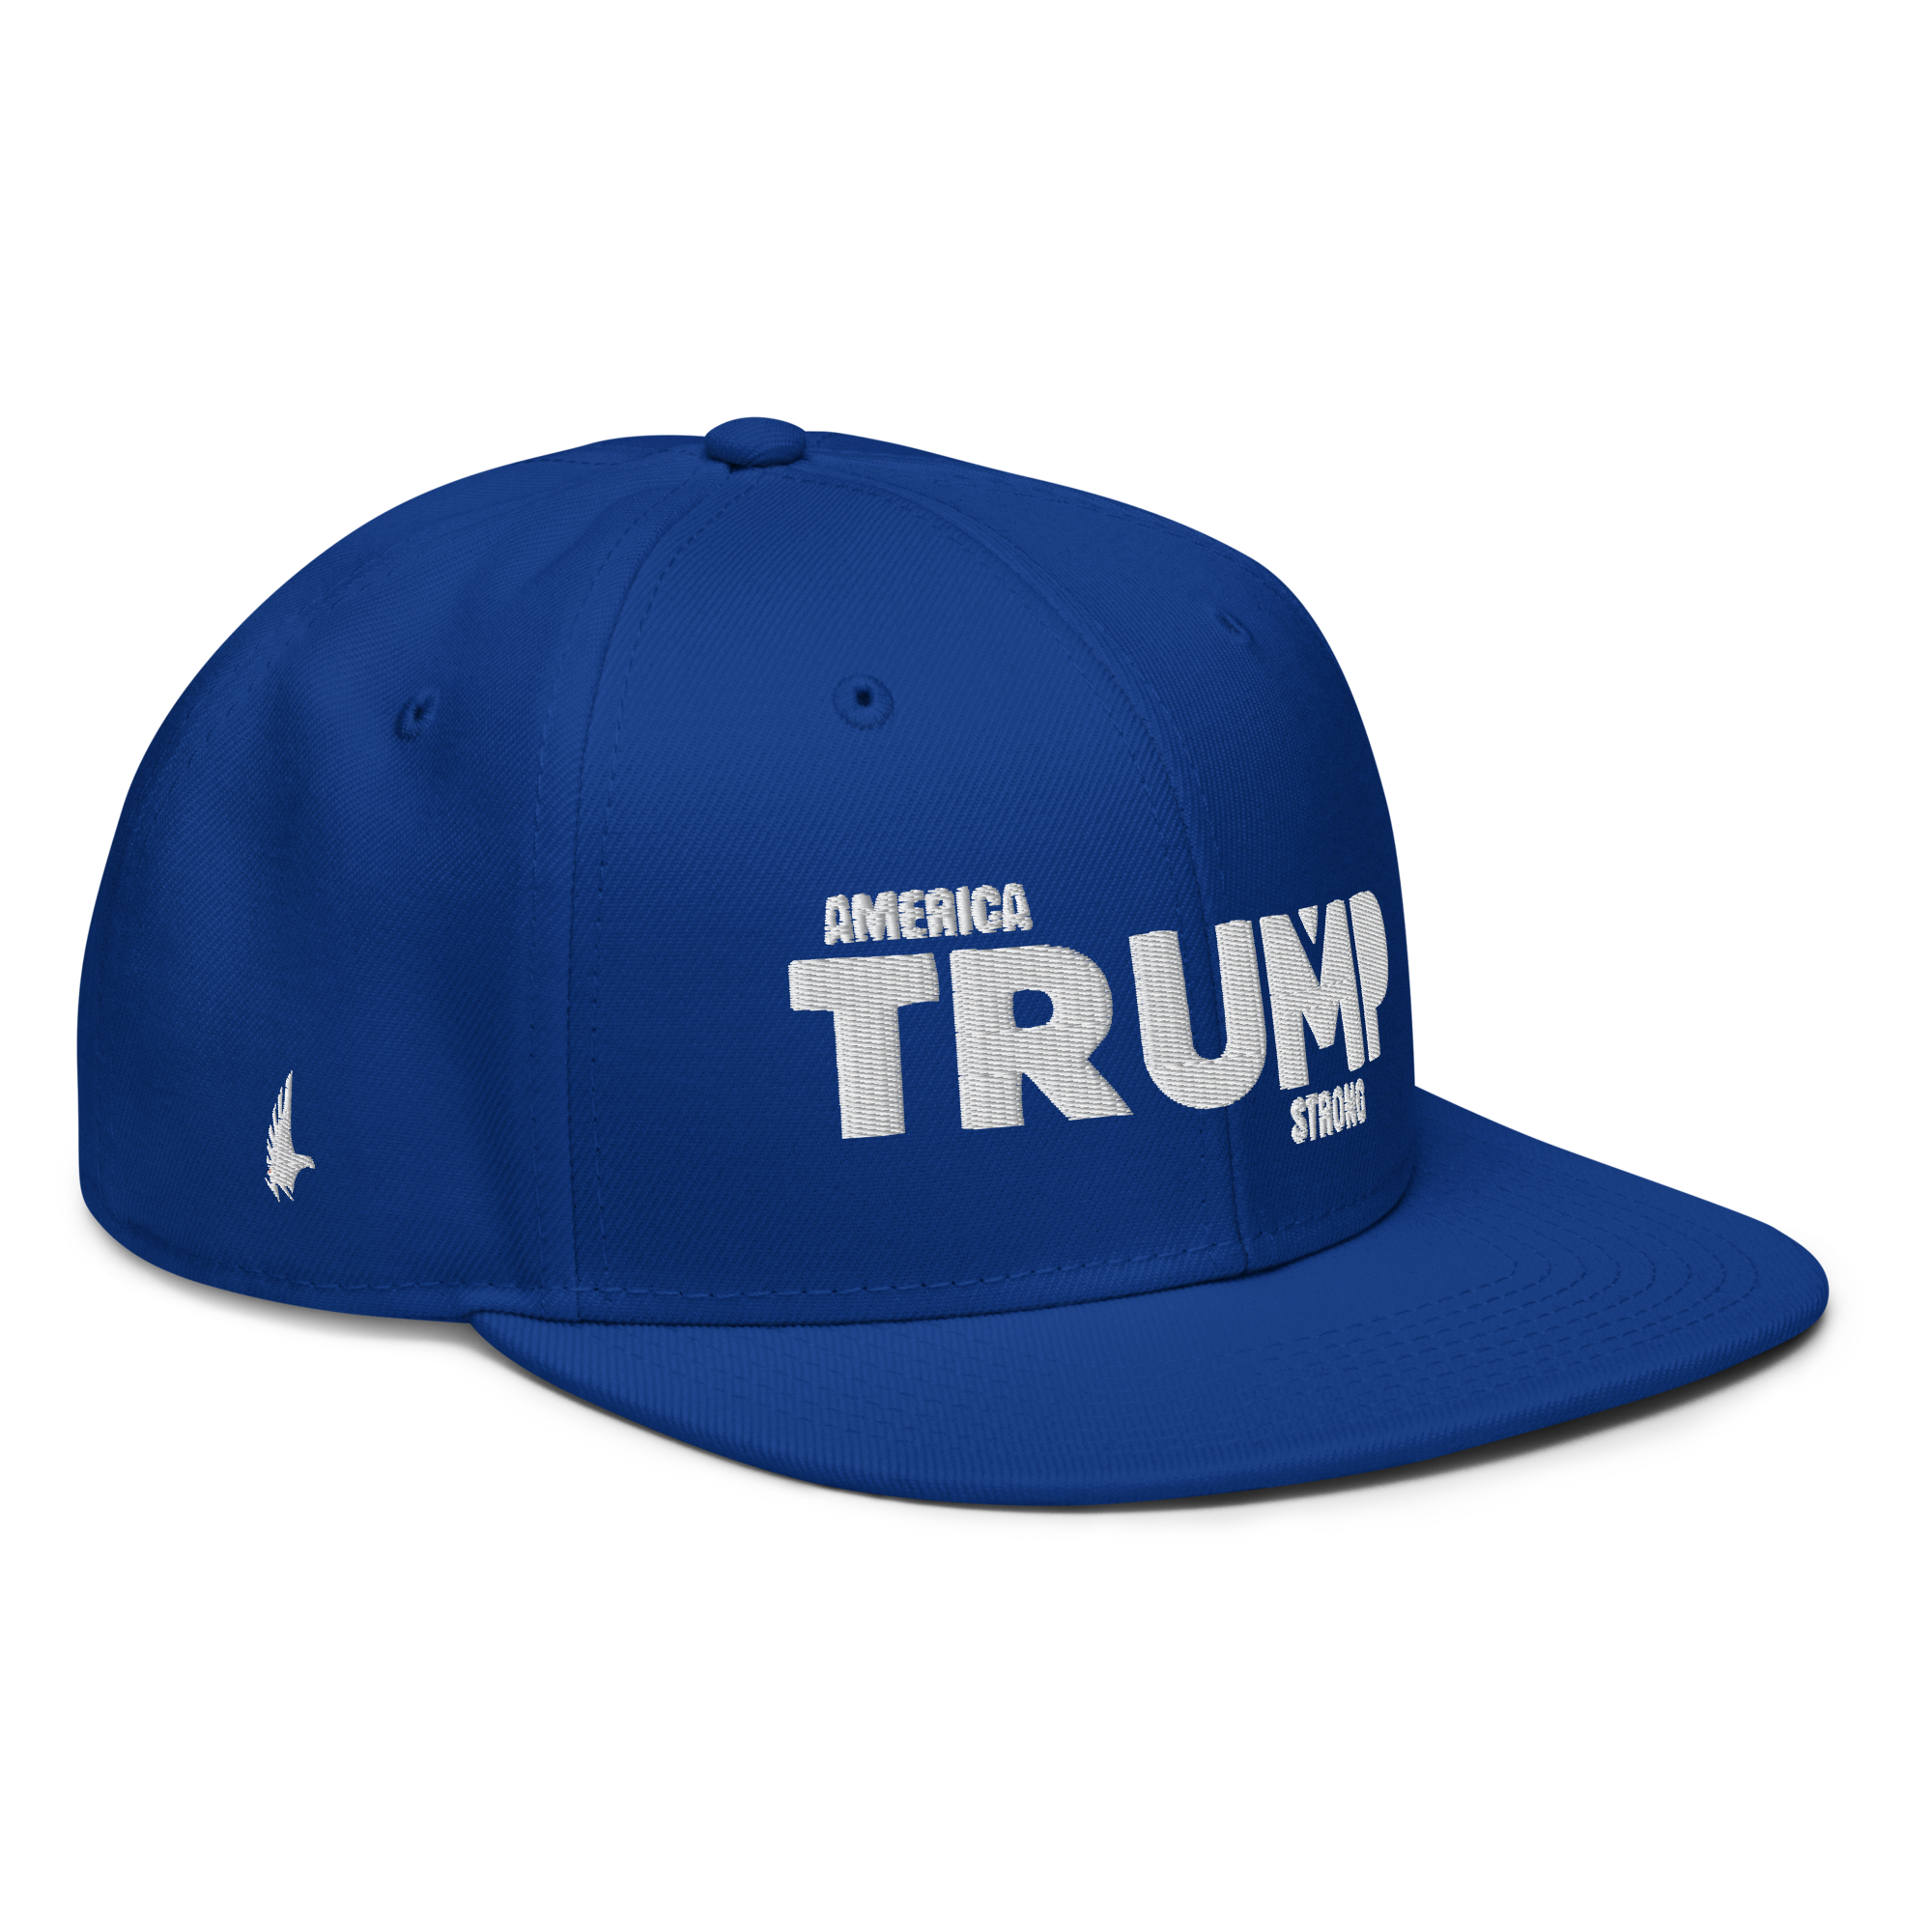 America Trump Strong Snapback Hat Blue - Loyalty Vibes